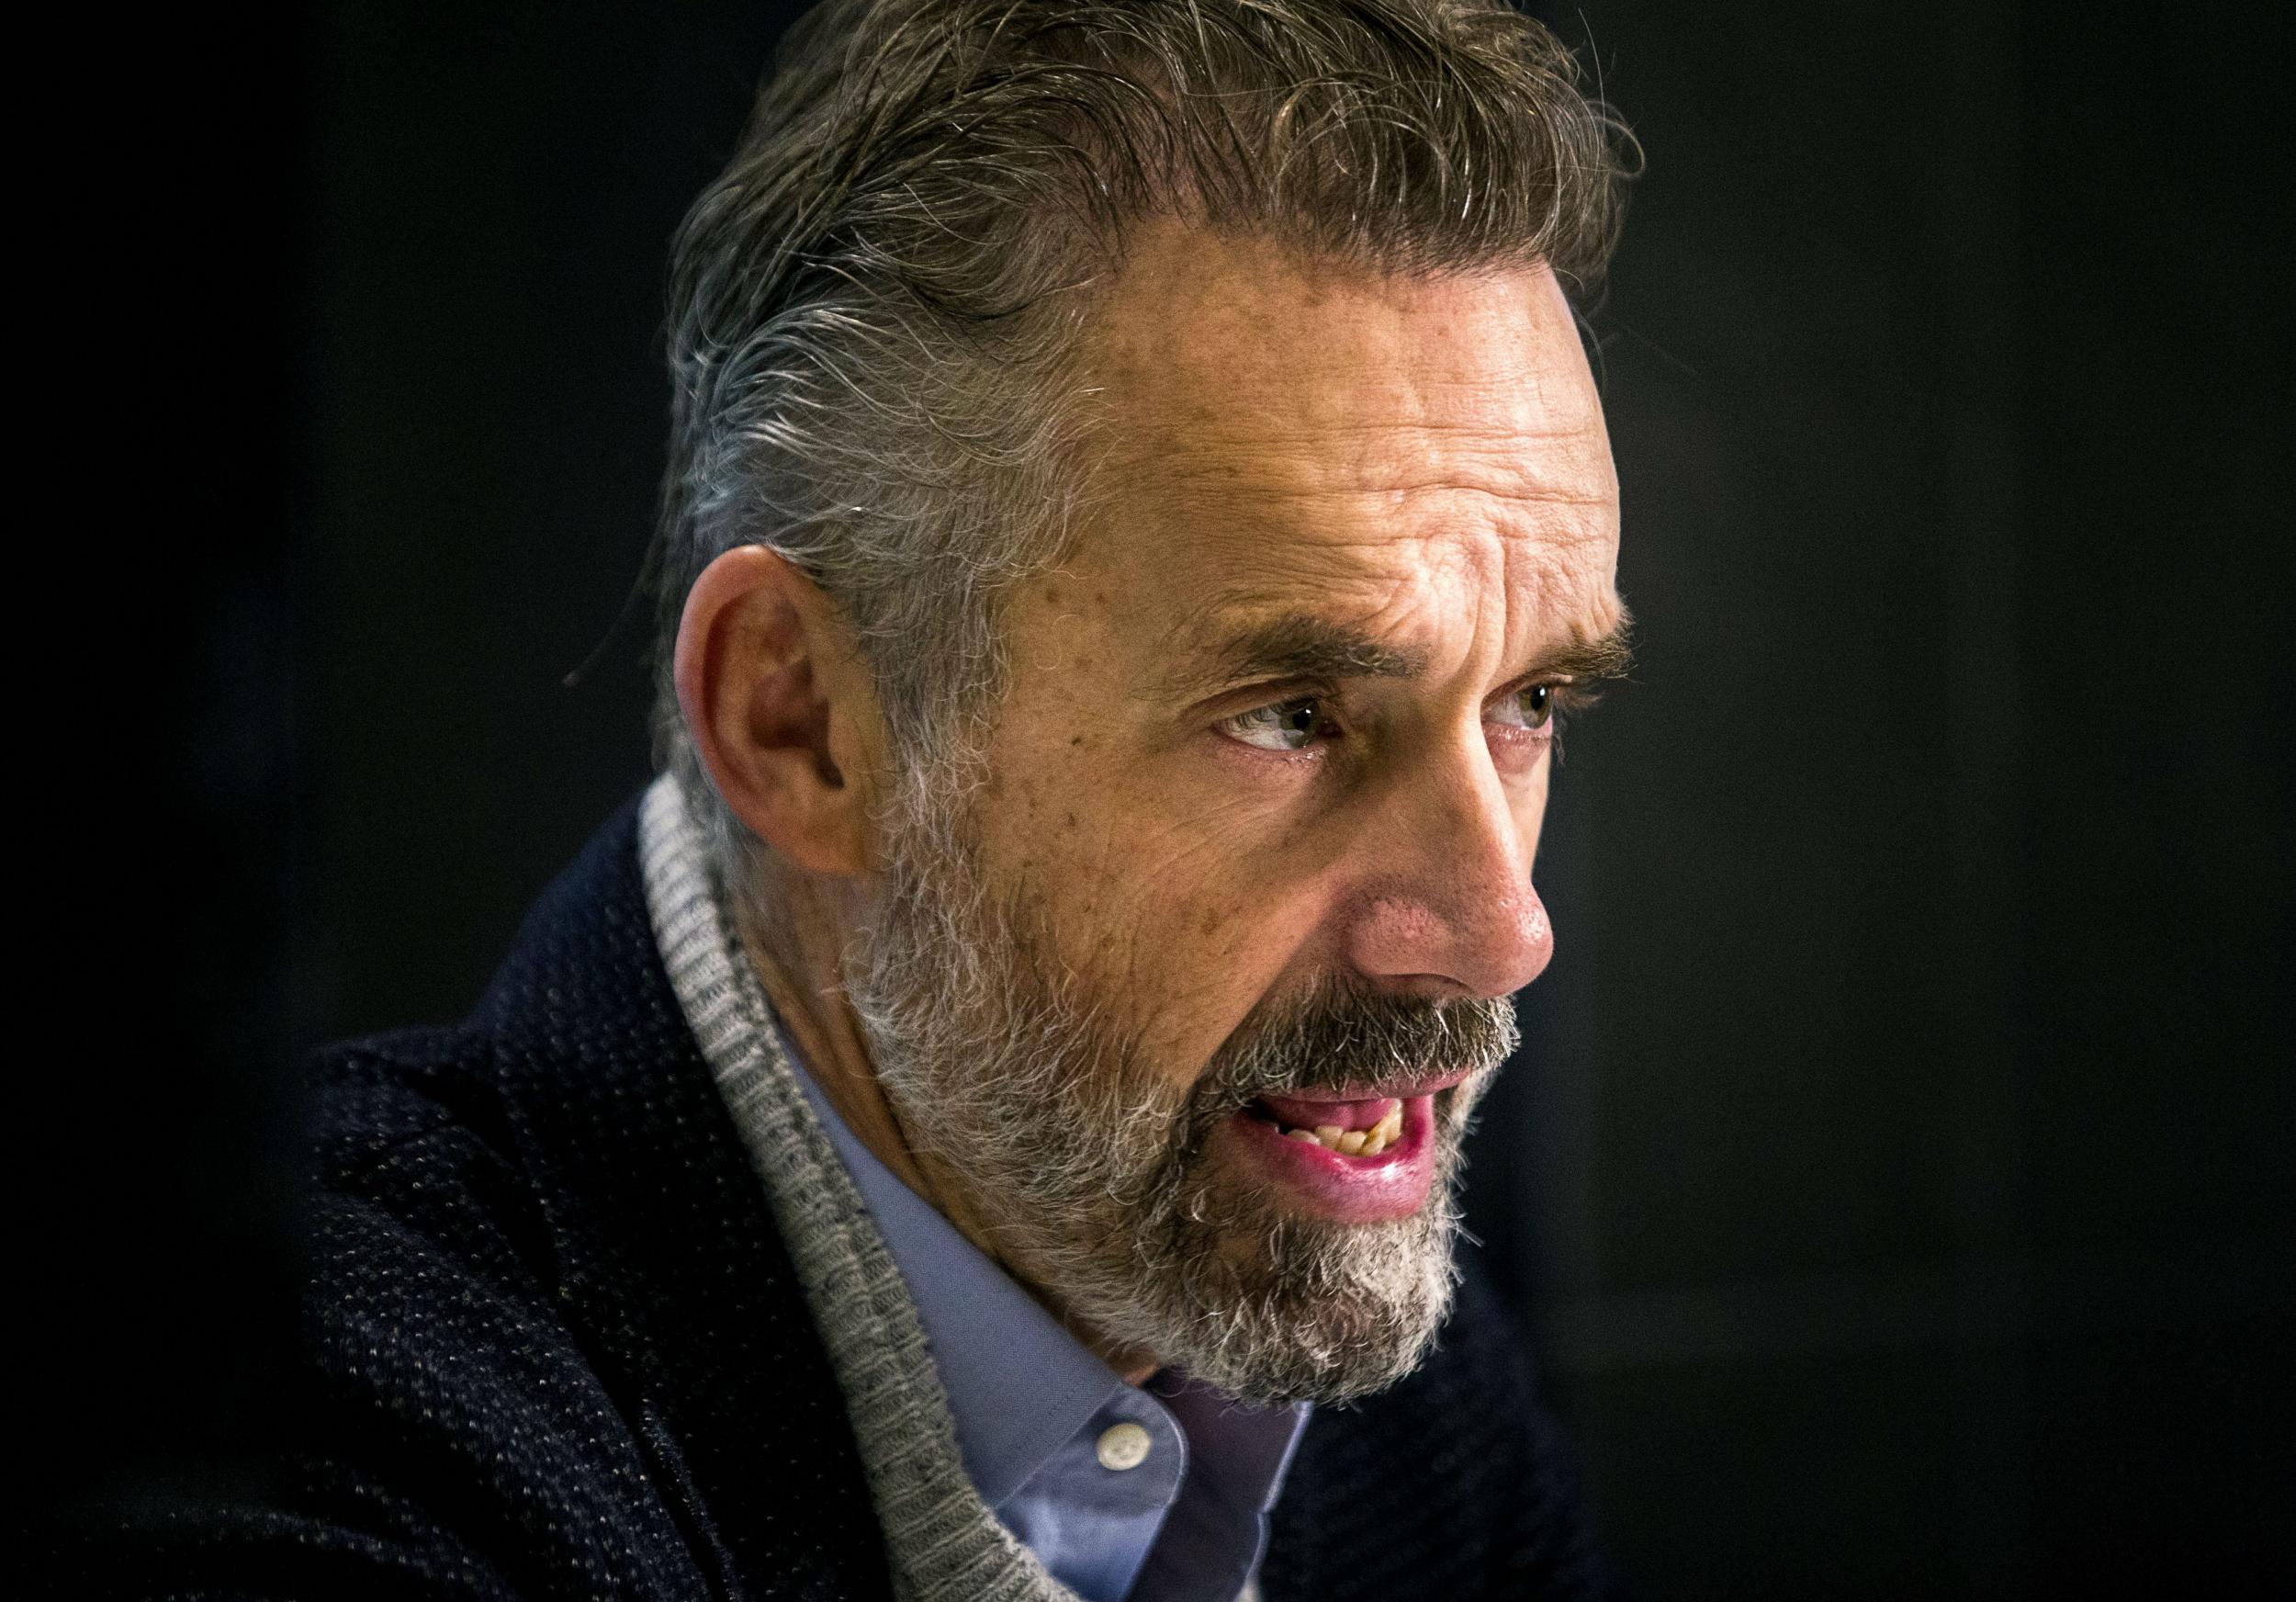 Jordan Peterson’s last book sold five million copies but some staff at Penguin Random House are concerned about the content of his next one